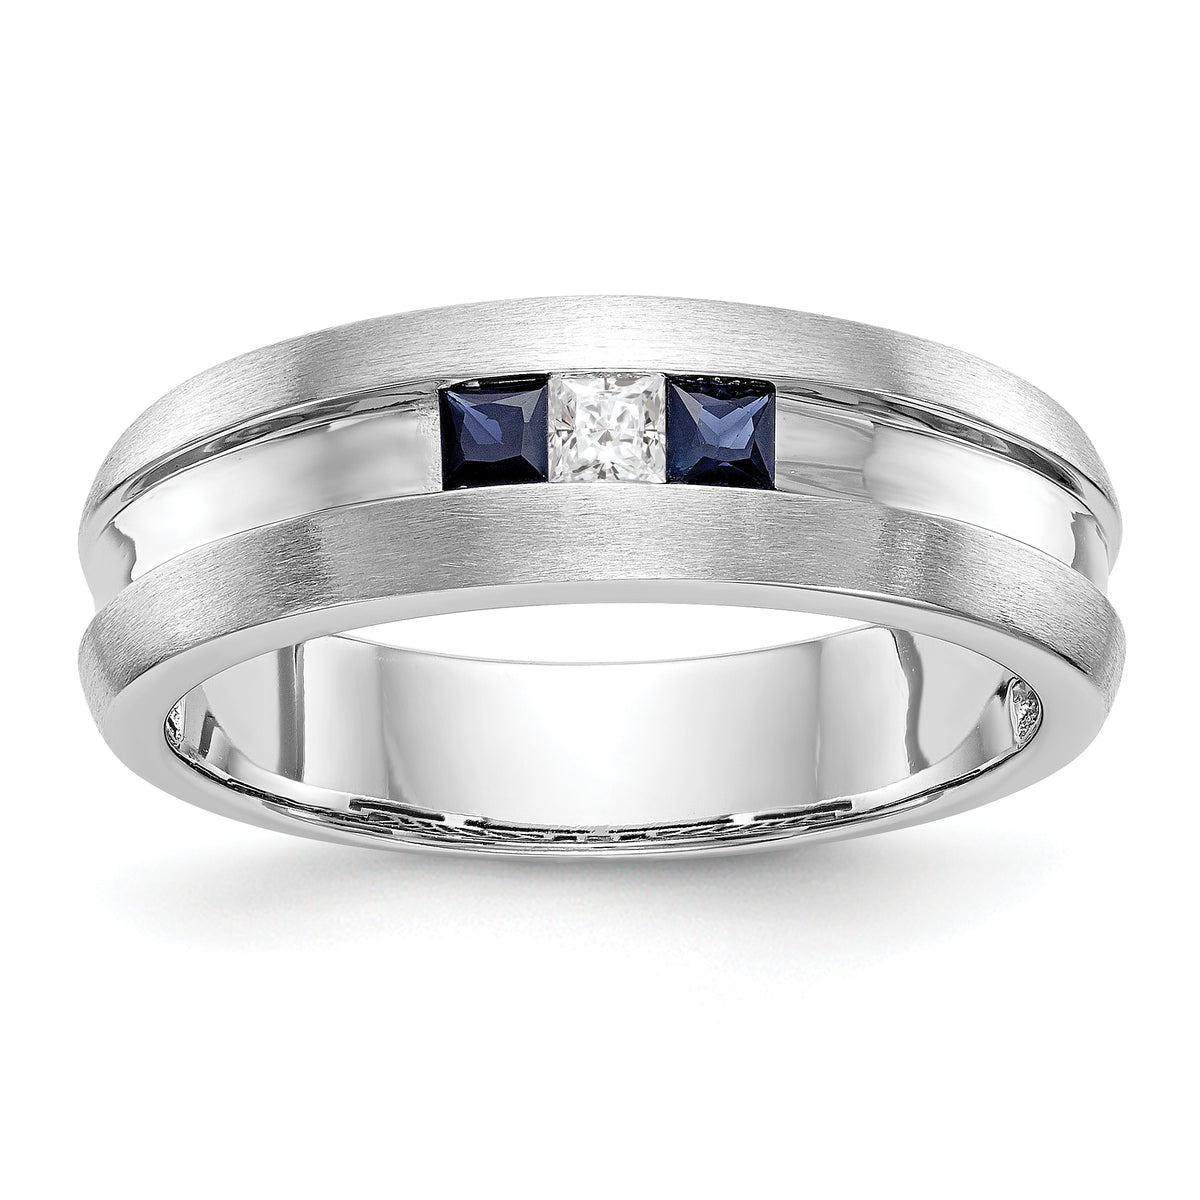 14K White Gold 1/10 carat Diamond and Sapphire Complete Men's Channel Band